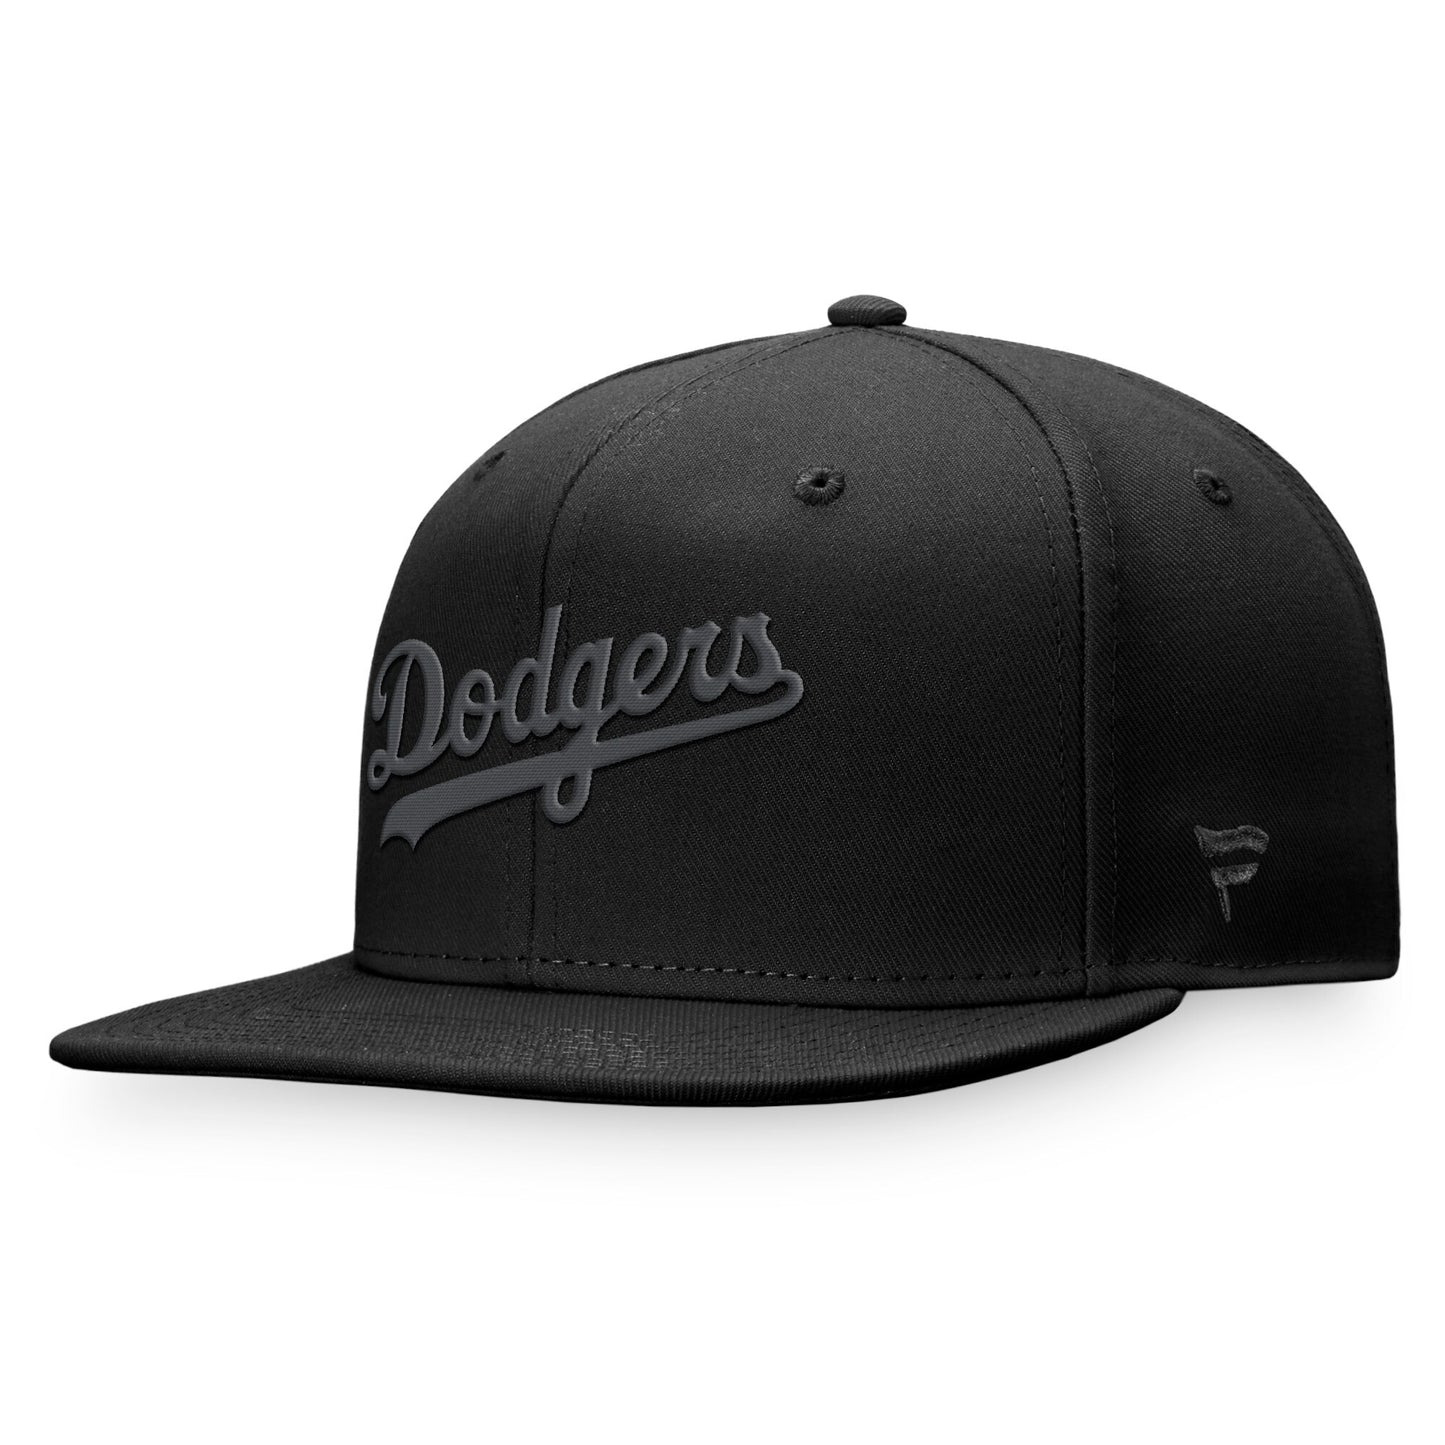 Los Angeles Dodgers Fanatics Branded Black on Black Fitted Hat